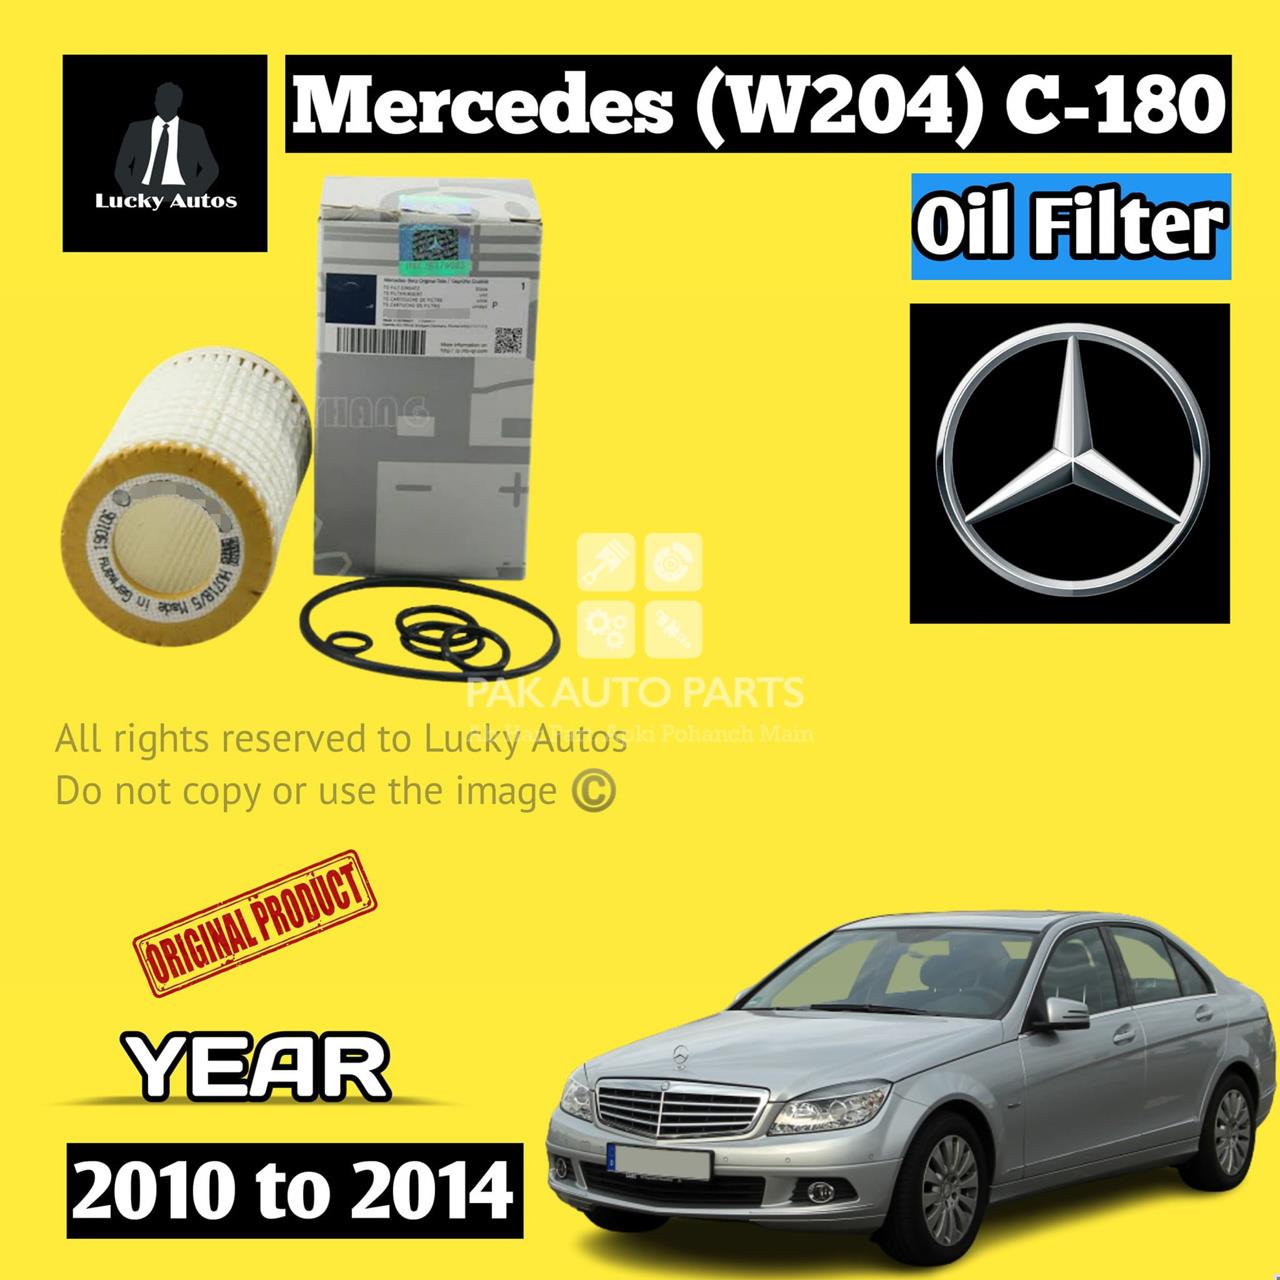 Picture of Mercedes Benz Oil Filter For W204 C-180 Year 2010 to 2014